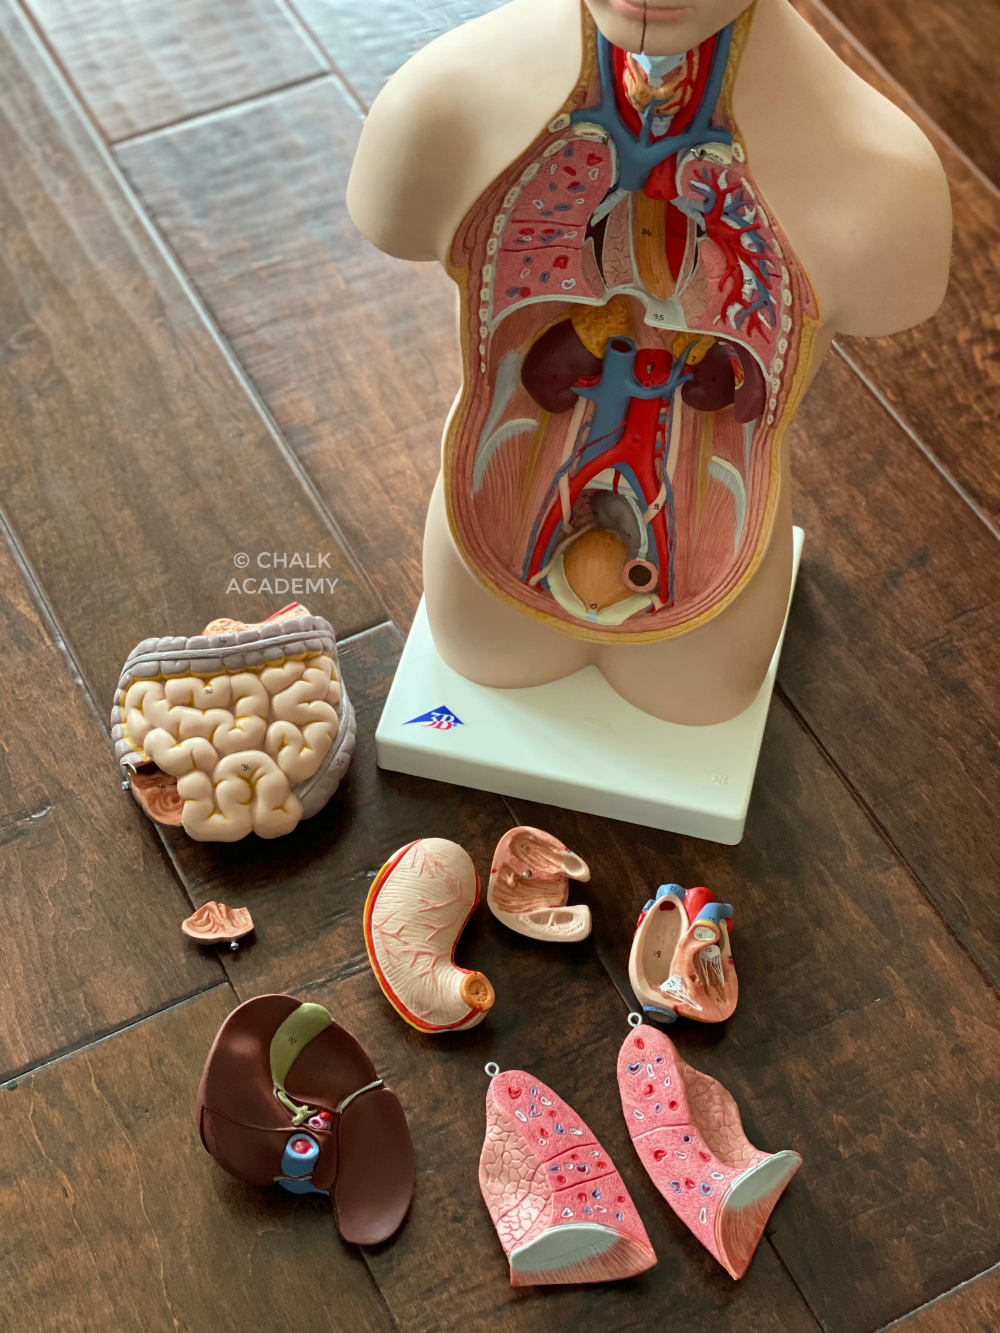 Recommended Human Anatomy Toys | Science Gifts for Kids